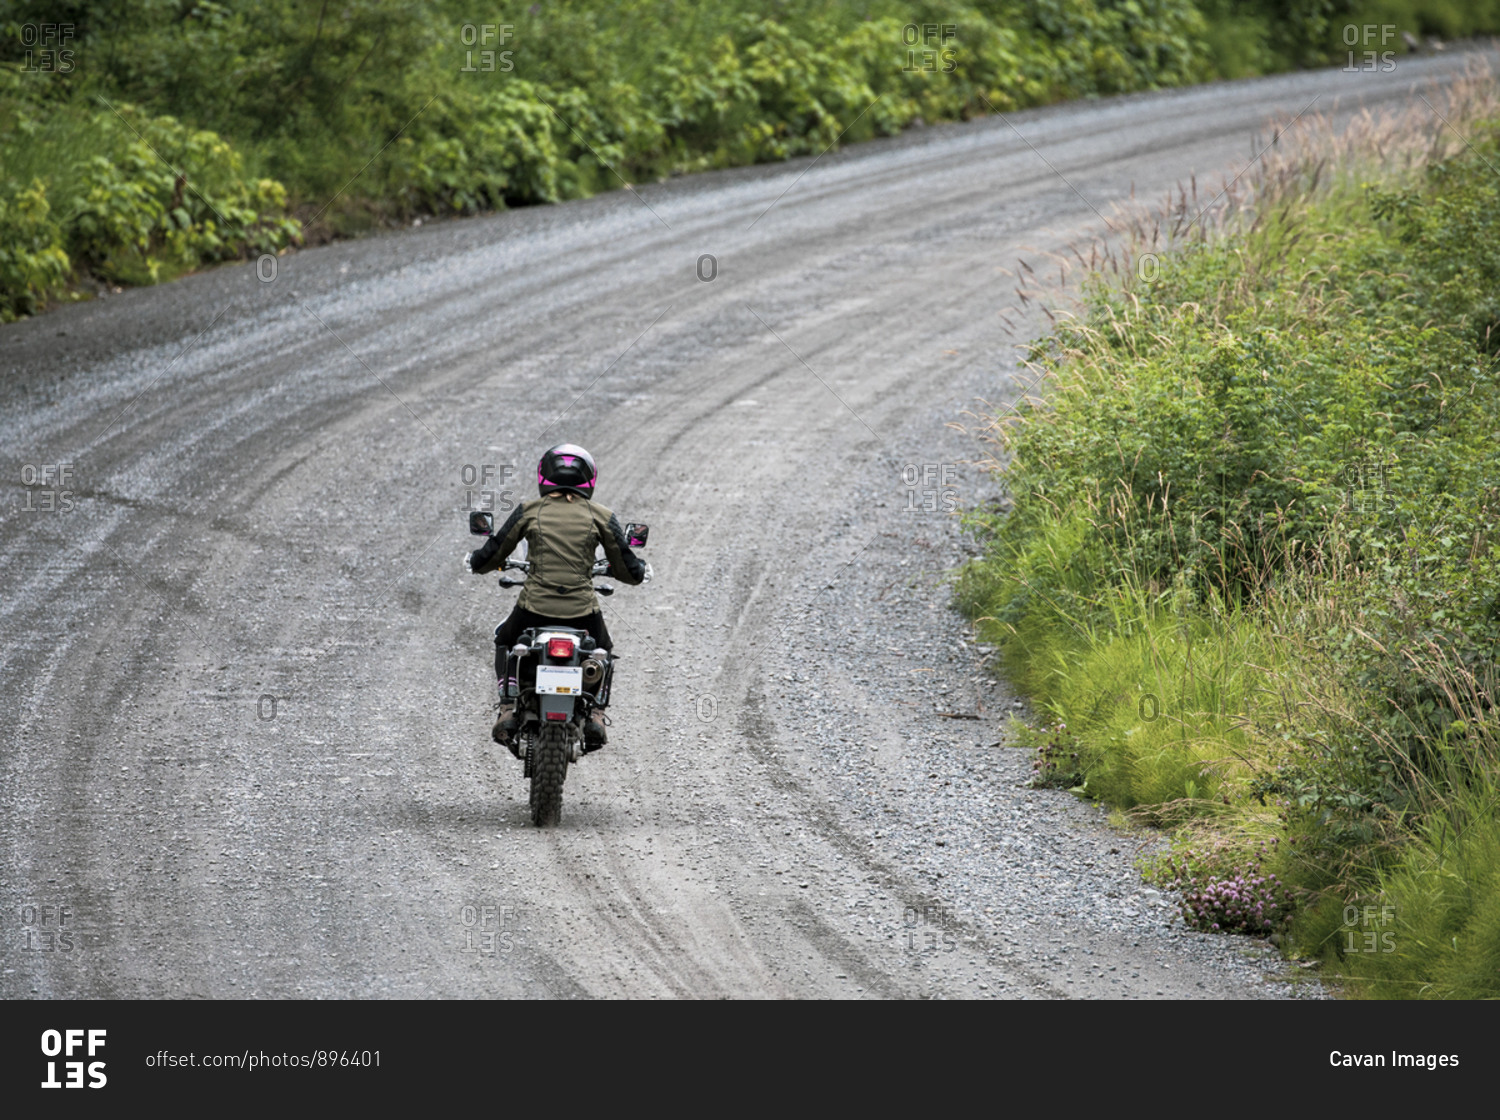 A women rides her motorcycle on a gravel road in Canada.